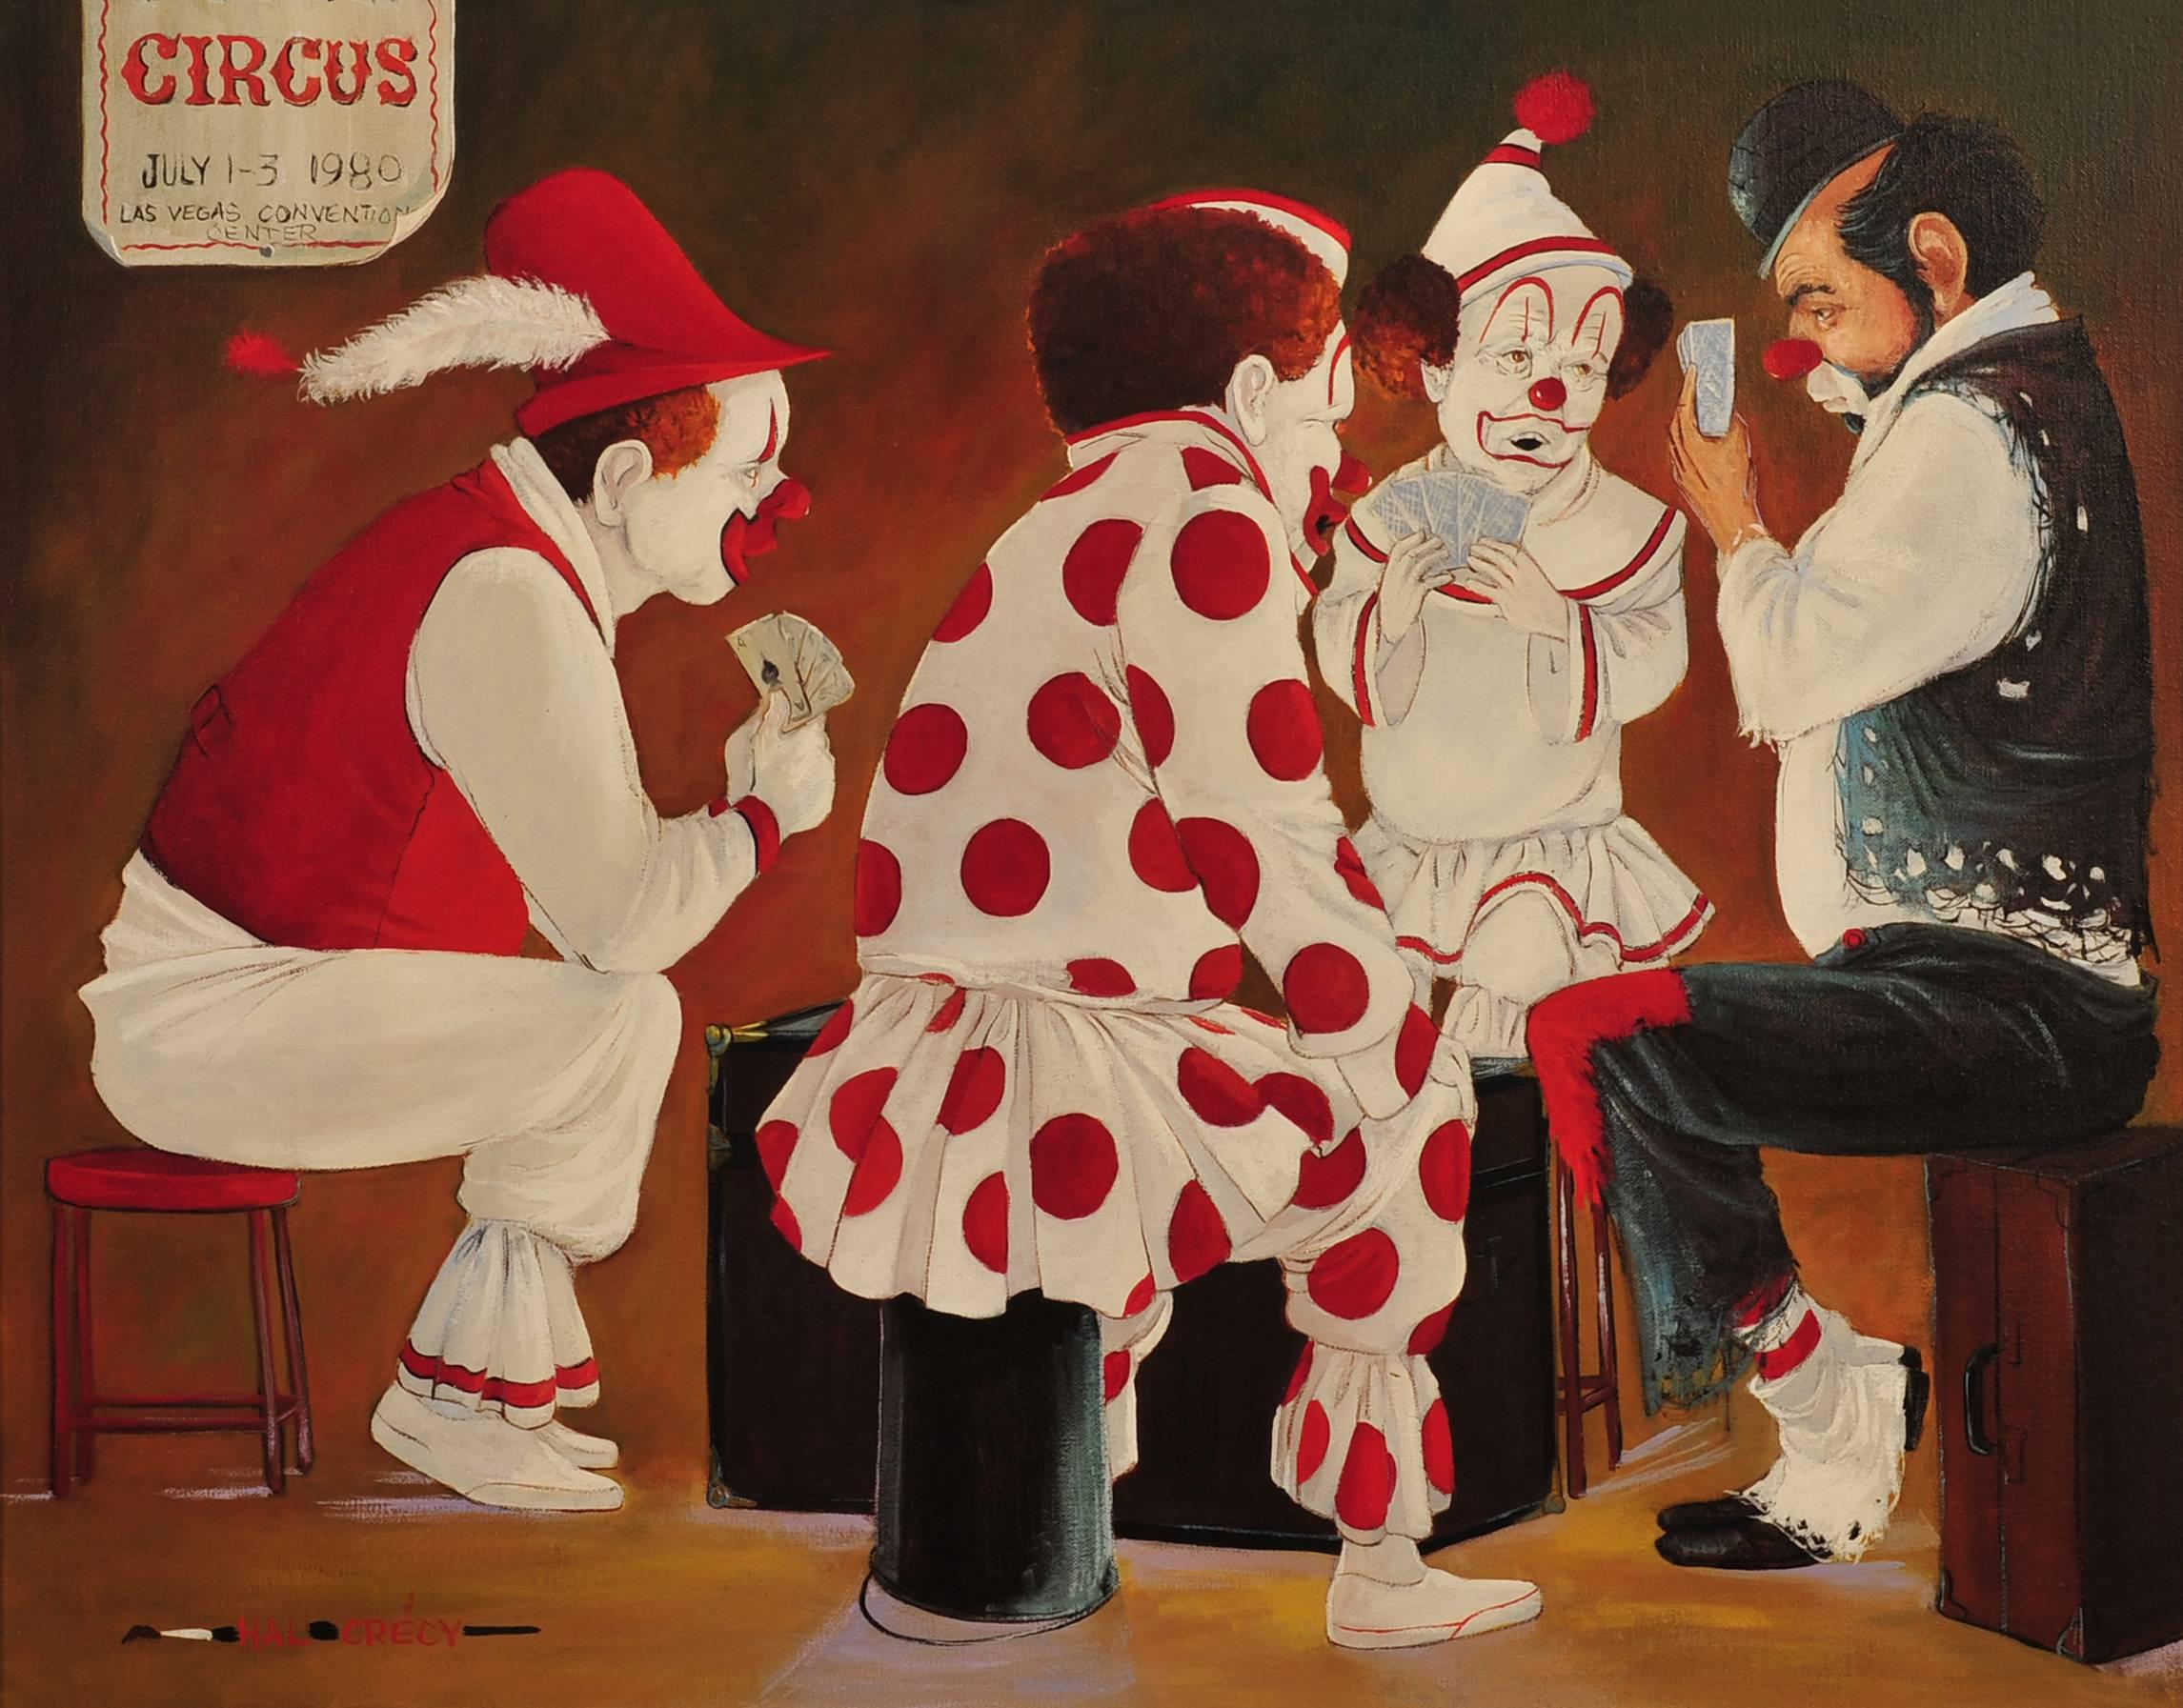 There three clowns at the. Arthur Saron Sarnoff картины клоуны. Poker Painting обзор блокна. There are three Clowns at the Circus. 3 Clowns looking at each other.